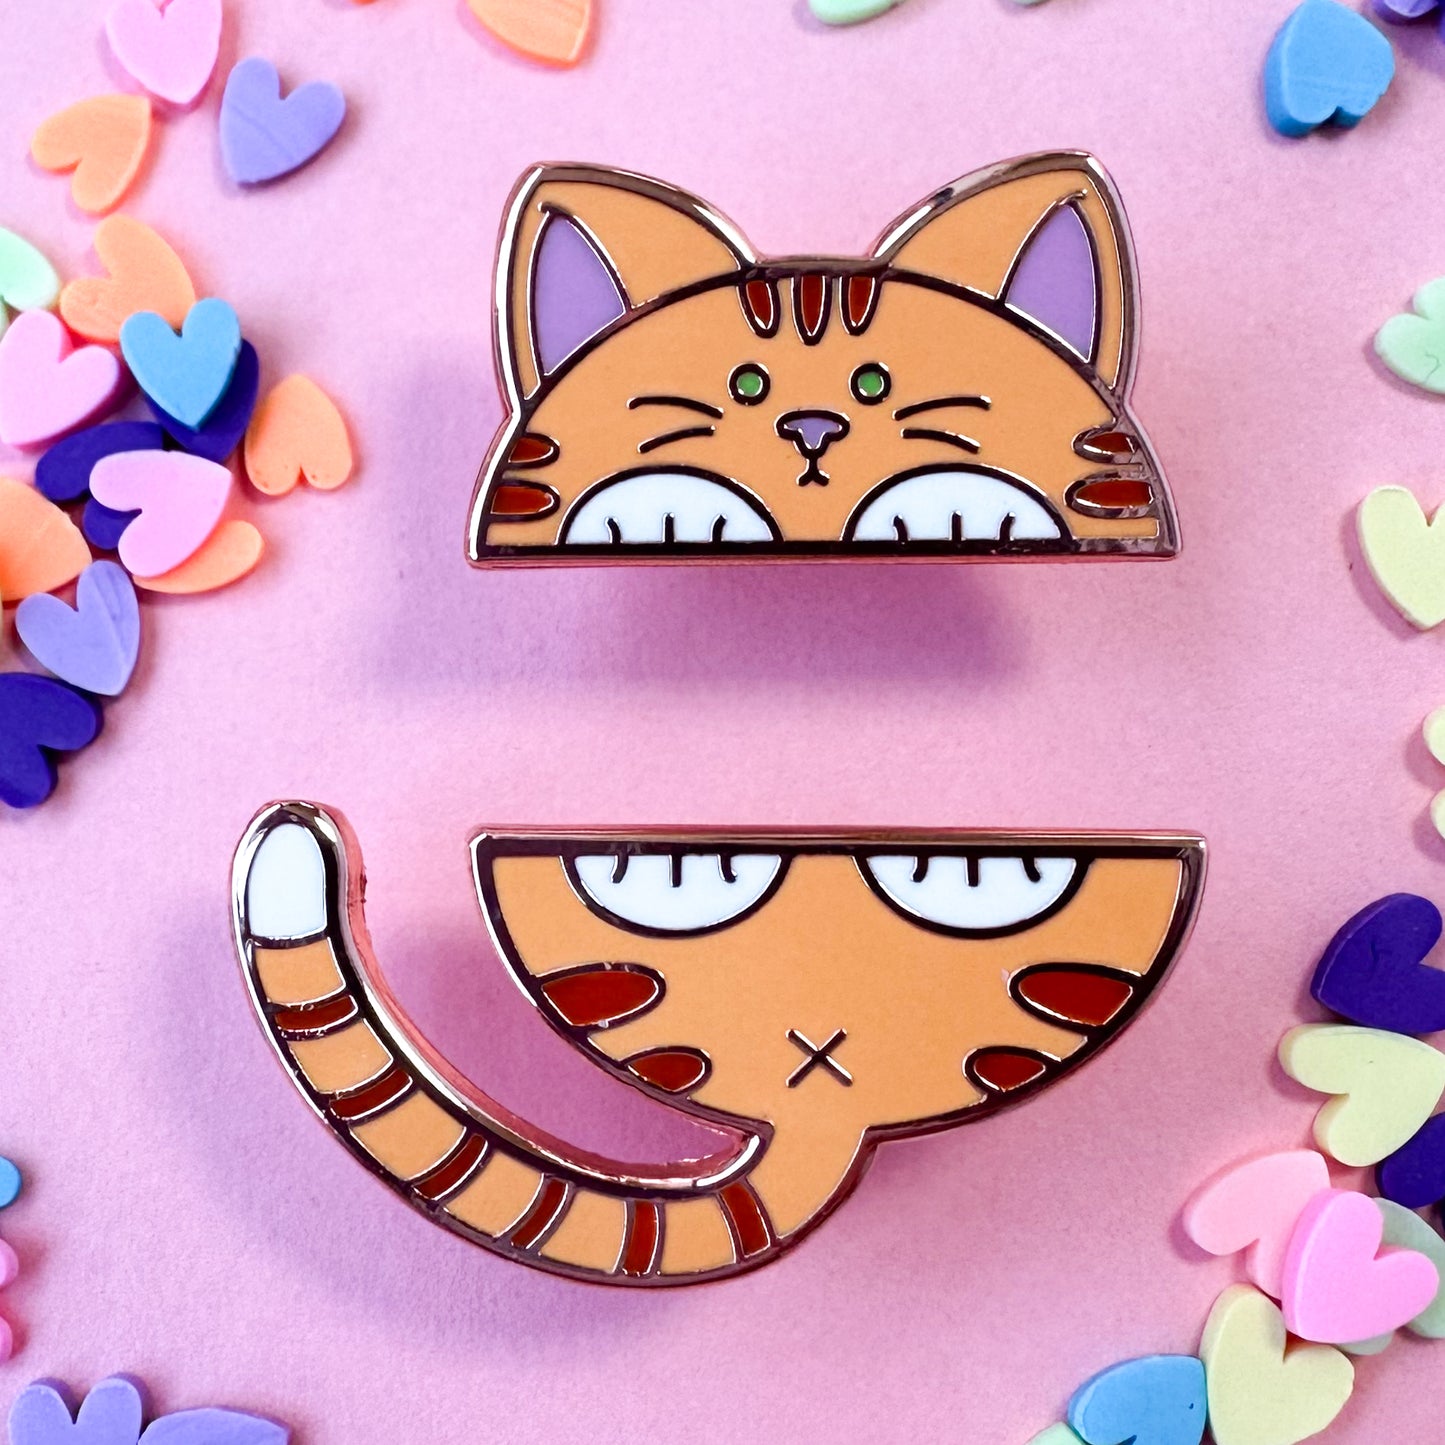 Two enamel pins that come together to form the top and bottom half of a cute cat. The cat is orange with stripes. The pin is on a pink background with candy hearts surrounding it. 